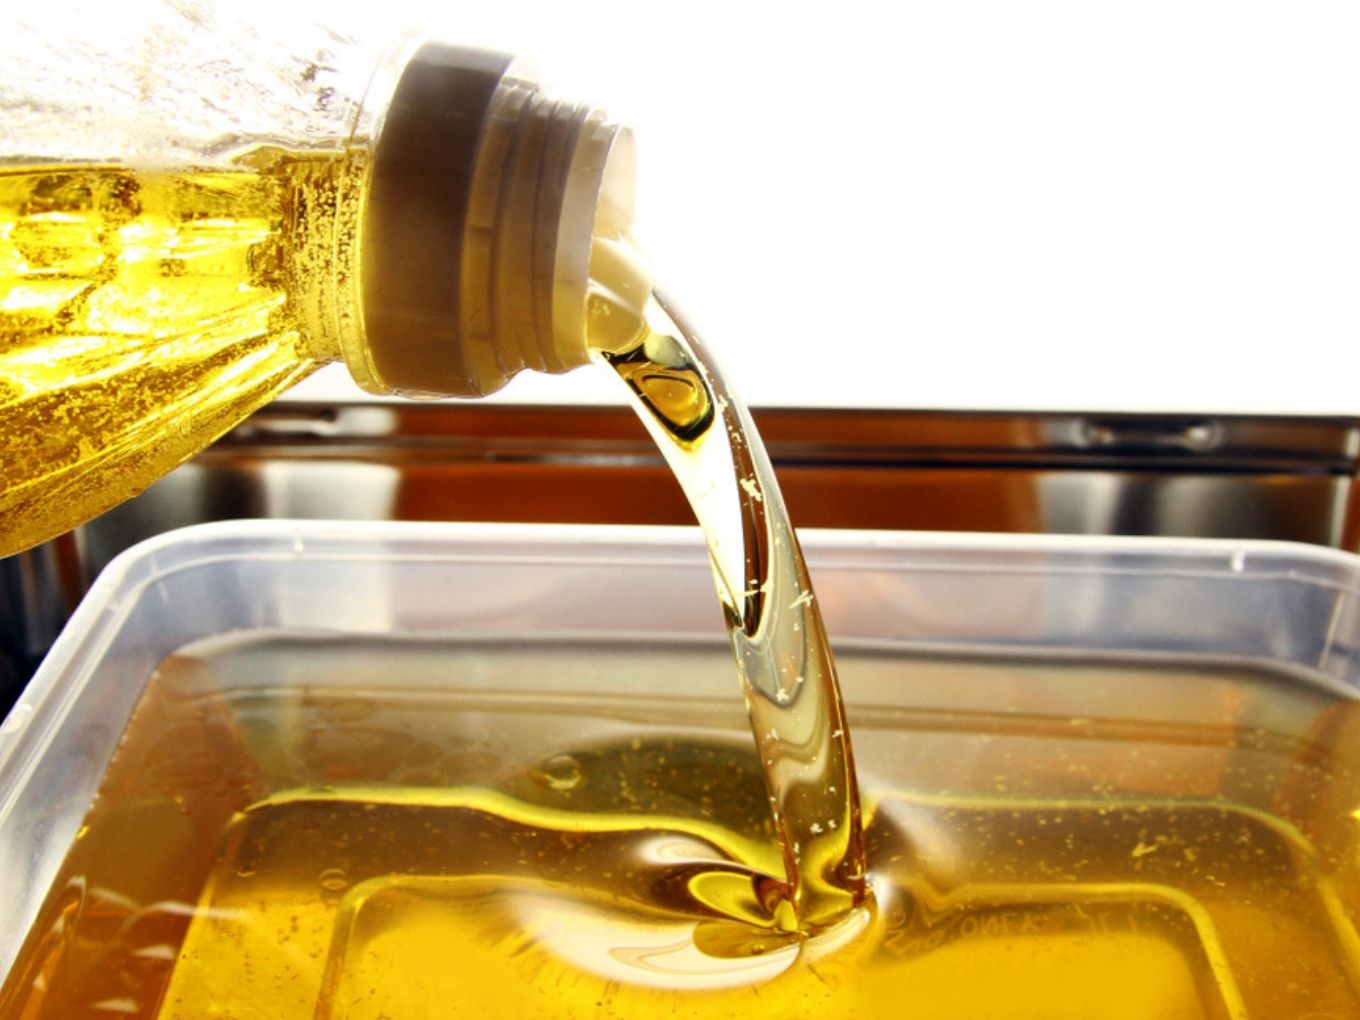 Zomato Ties Up With BioD To Produce Biodiesel from Used Cooking Oil